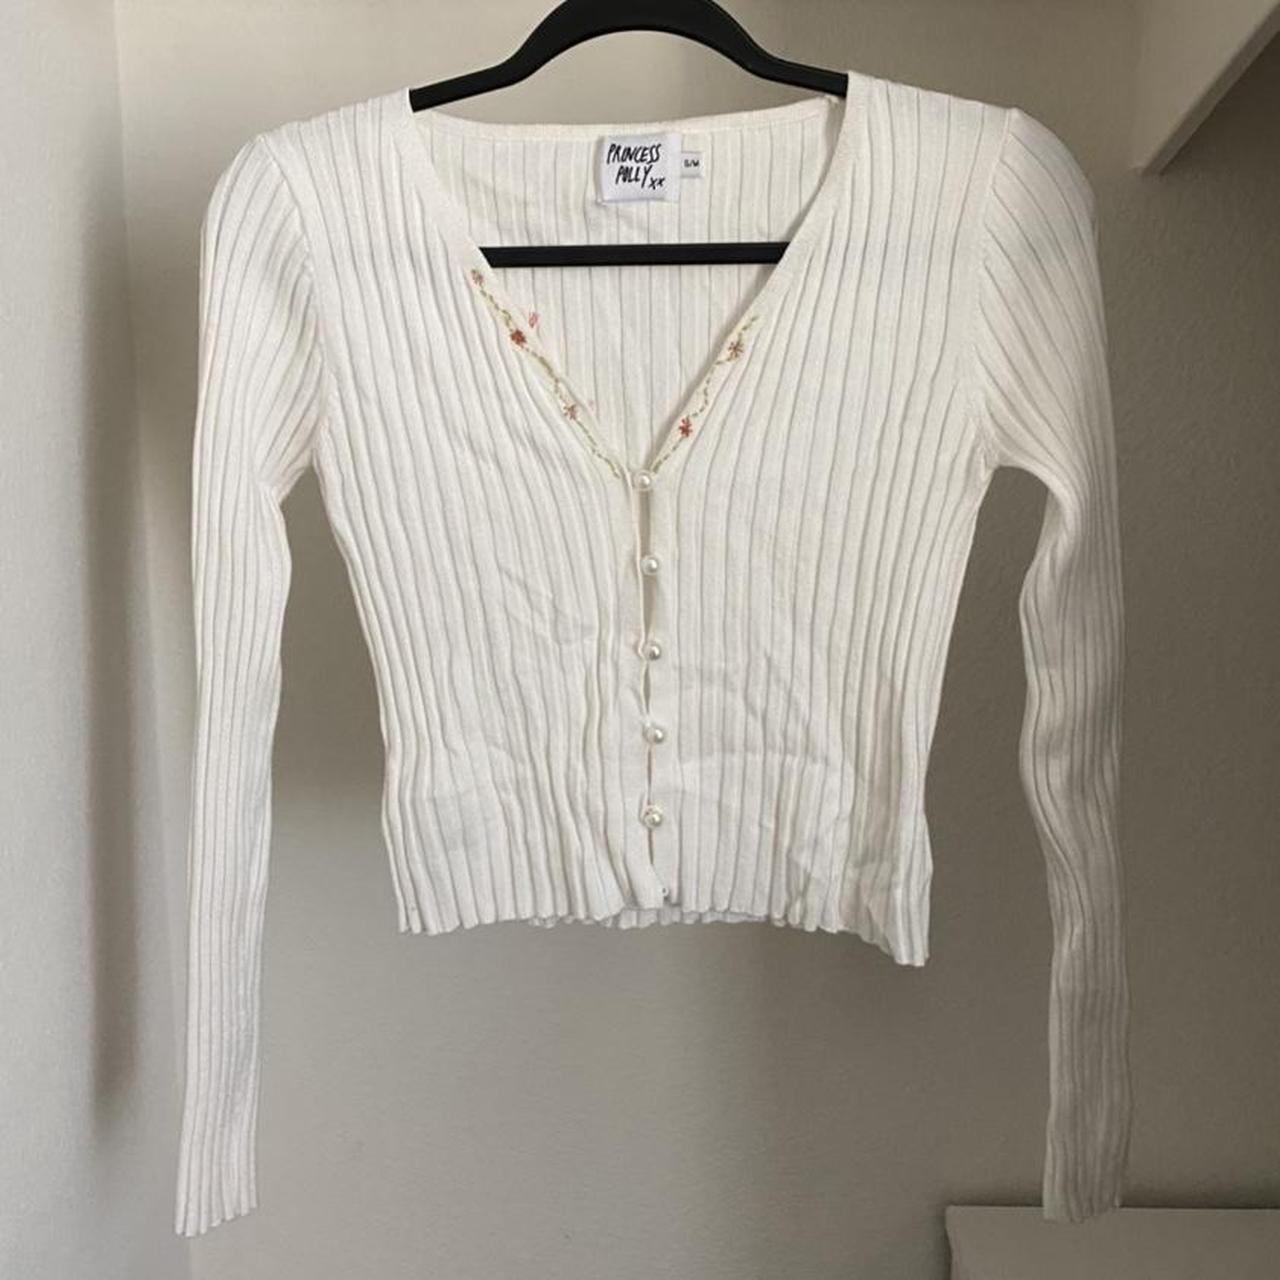 Princess Polly white ribbed button down cropped... - Depop